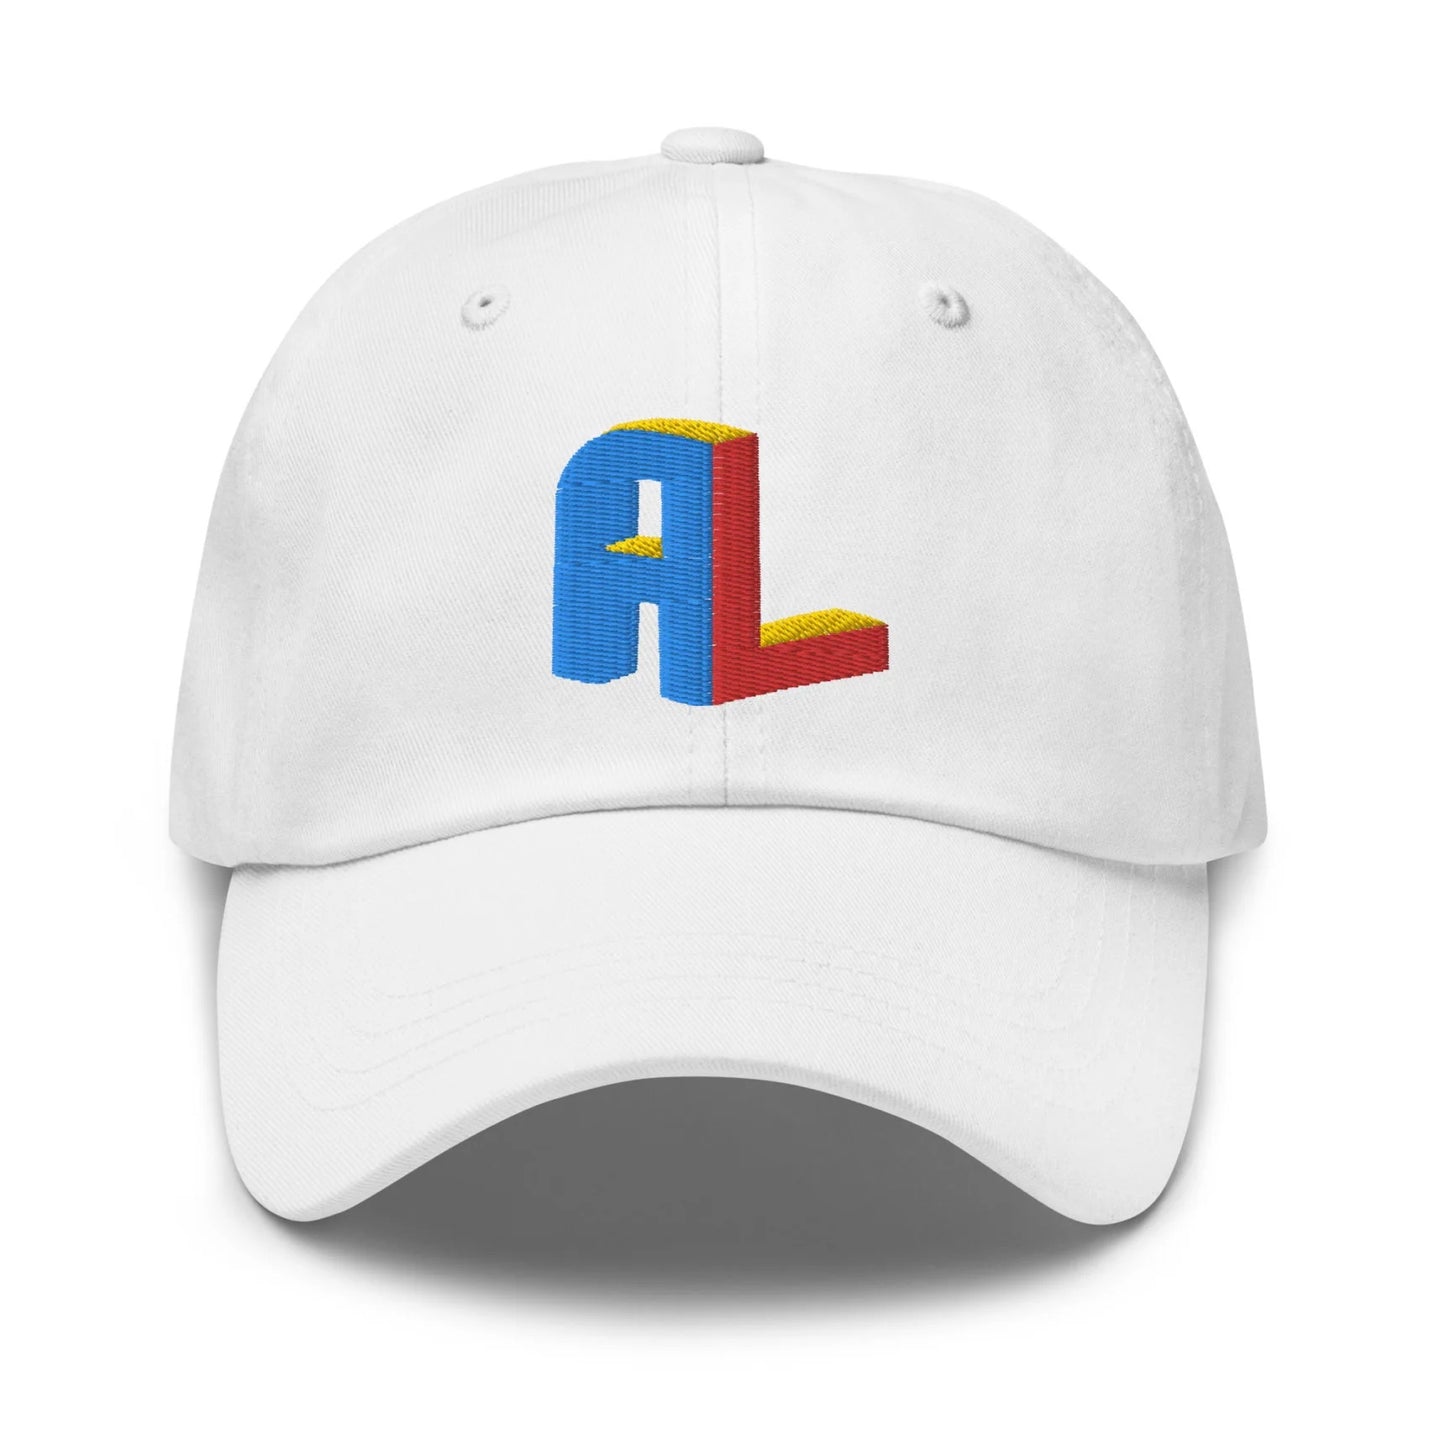 Ance Larmstrong ShowZone baseball dad hat in white